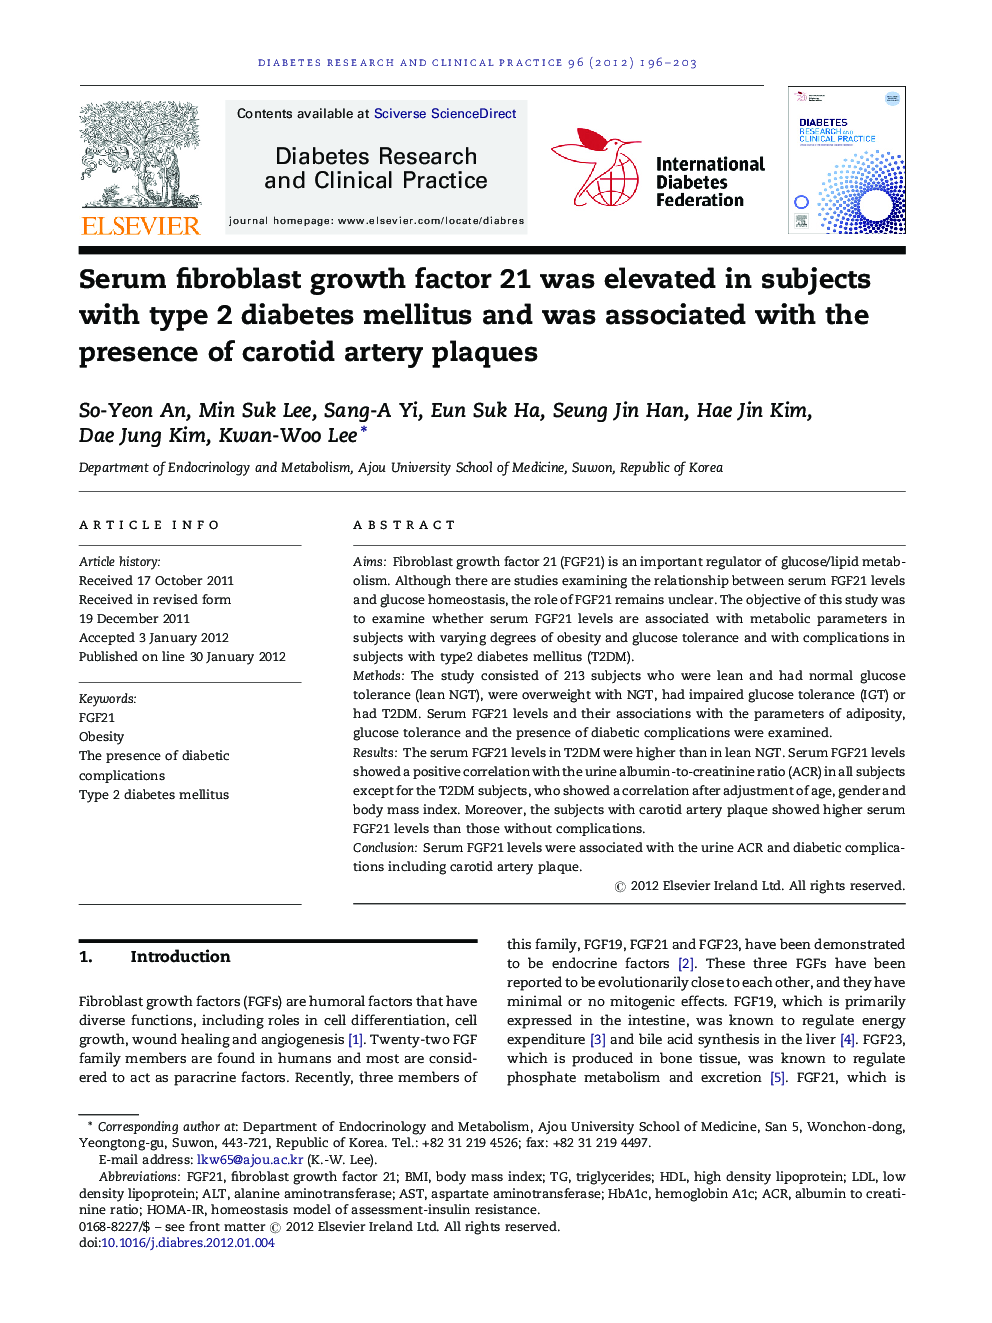 Serum fibroblast growth factor 21 was elevated in subjects with type 2 diabetes mellitus and was associated with the presence of carotid artery plaques